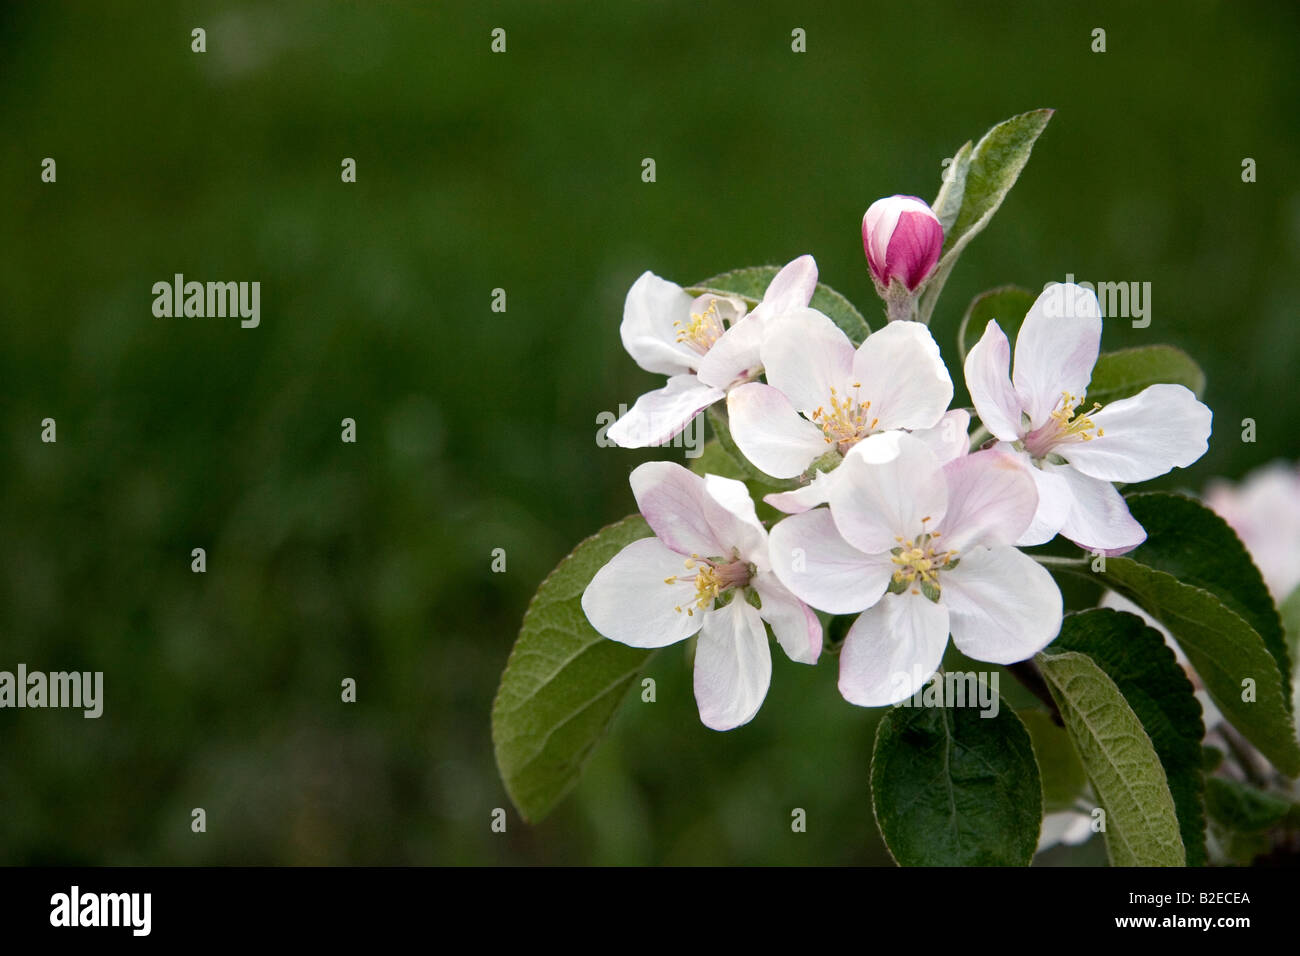 Apple blossoms in an orchard at Leland Michigan Stock Photo